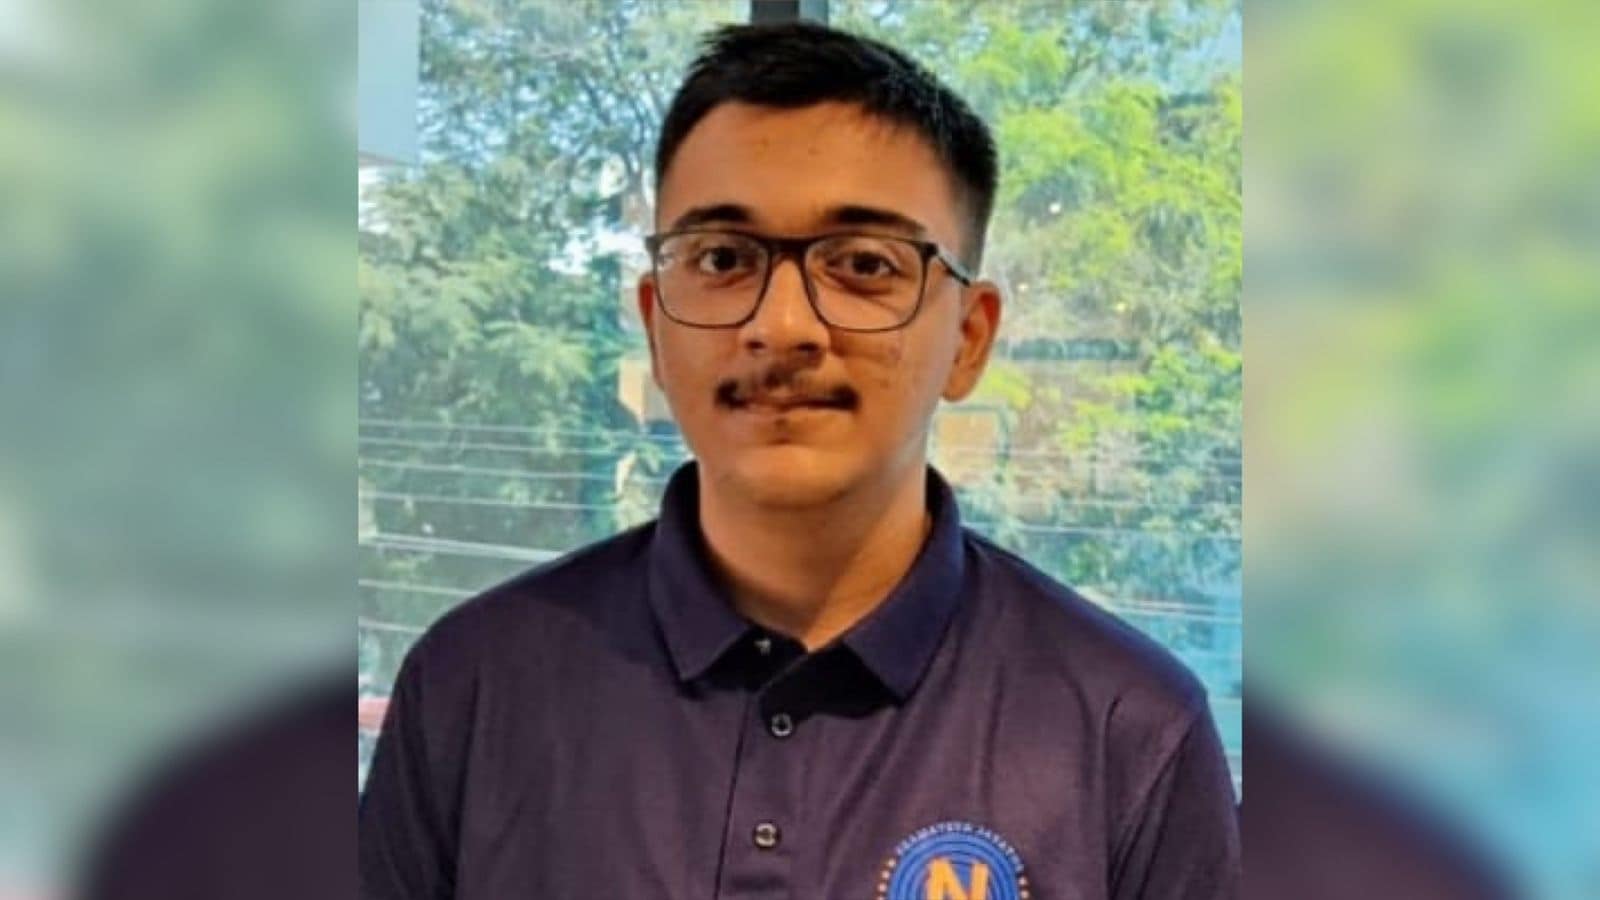 JEE Advanced topper Aryan Prakash with AIR 17 aims to join Computer Science at IIT Bombay, says his focus is on research